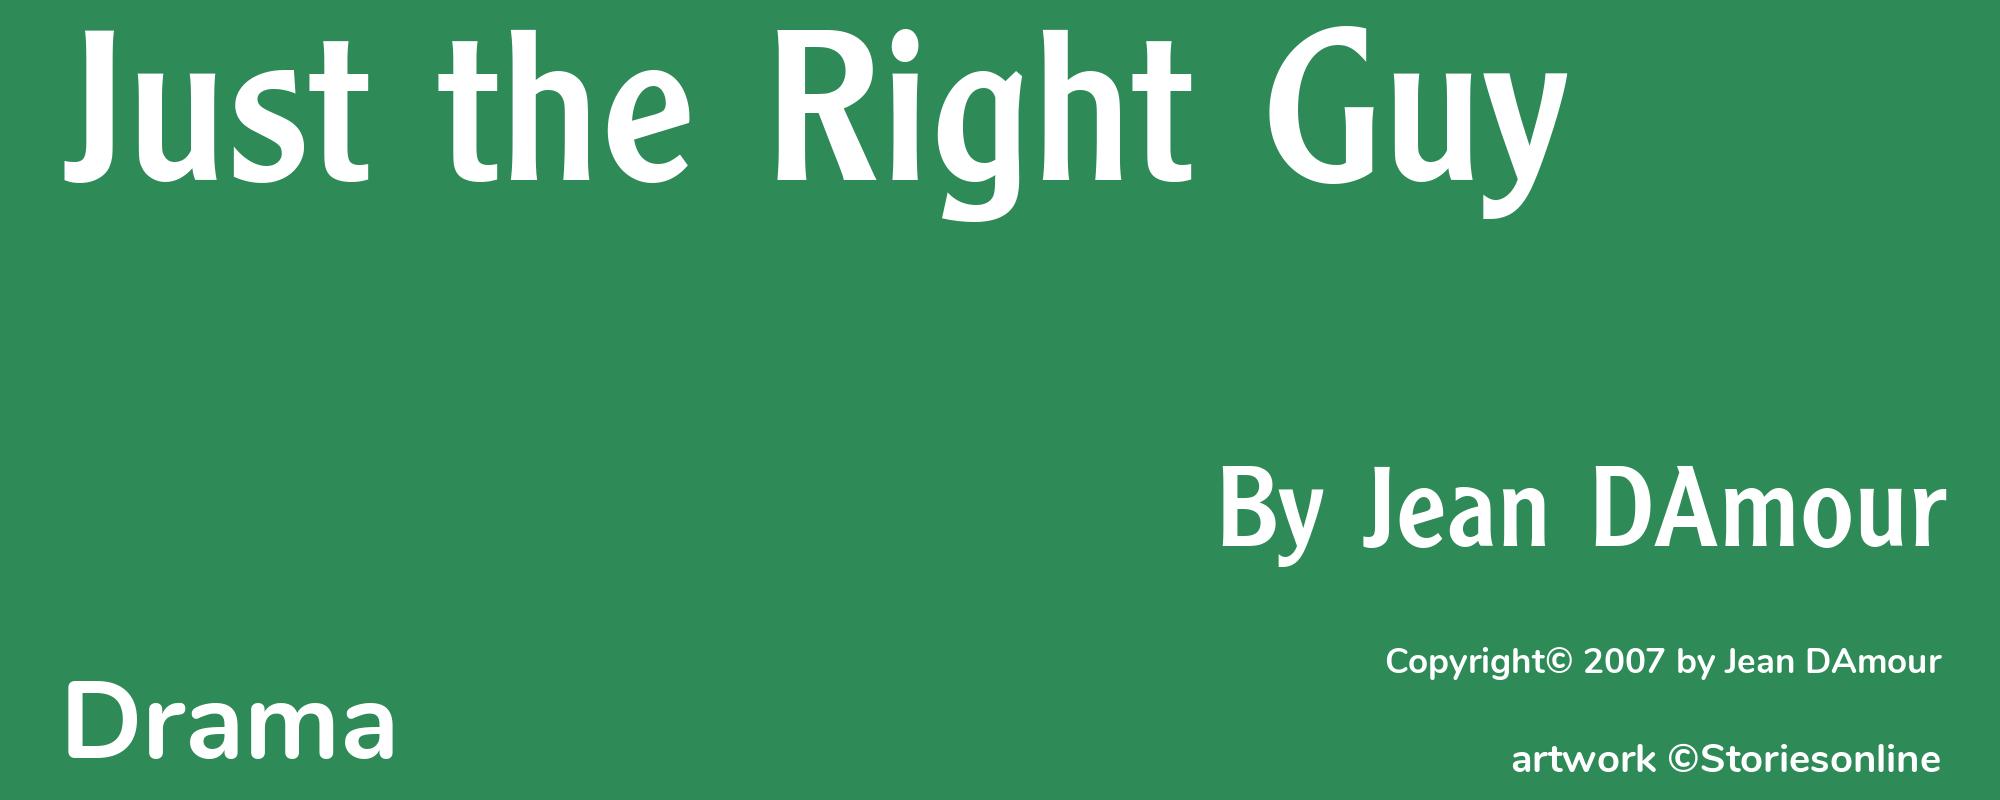 Just the Right Guy - Cover